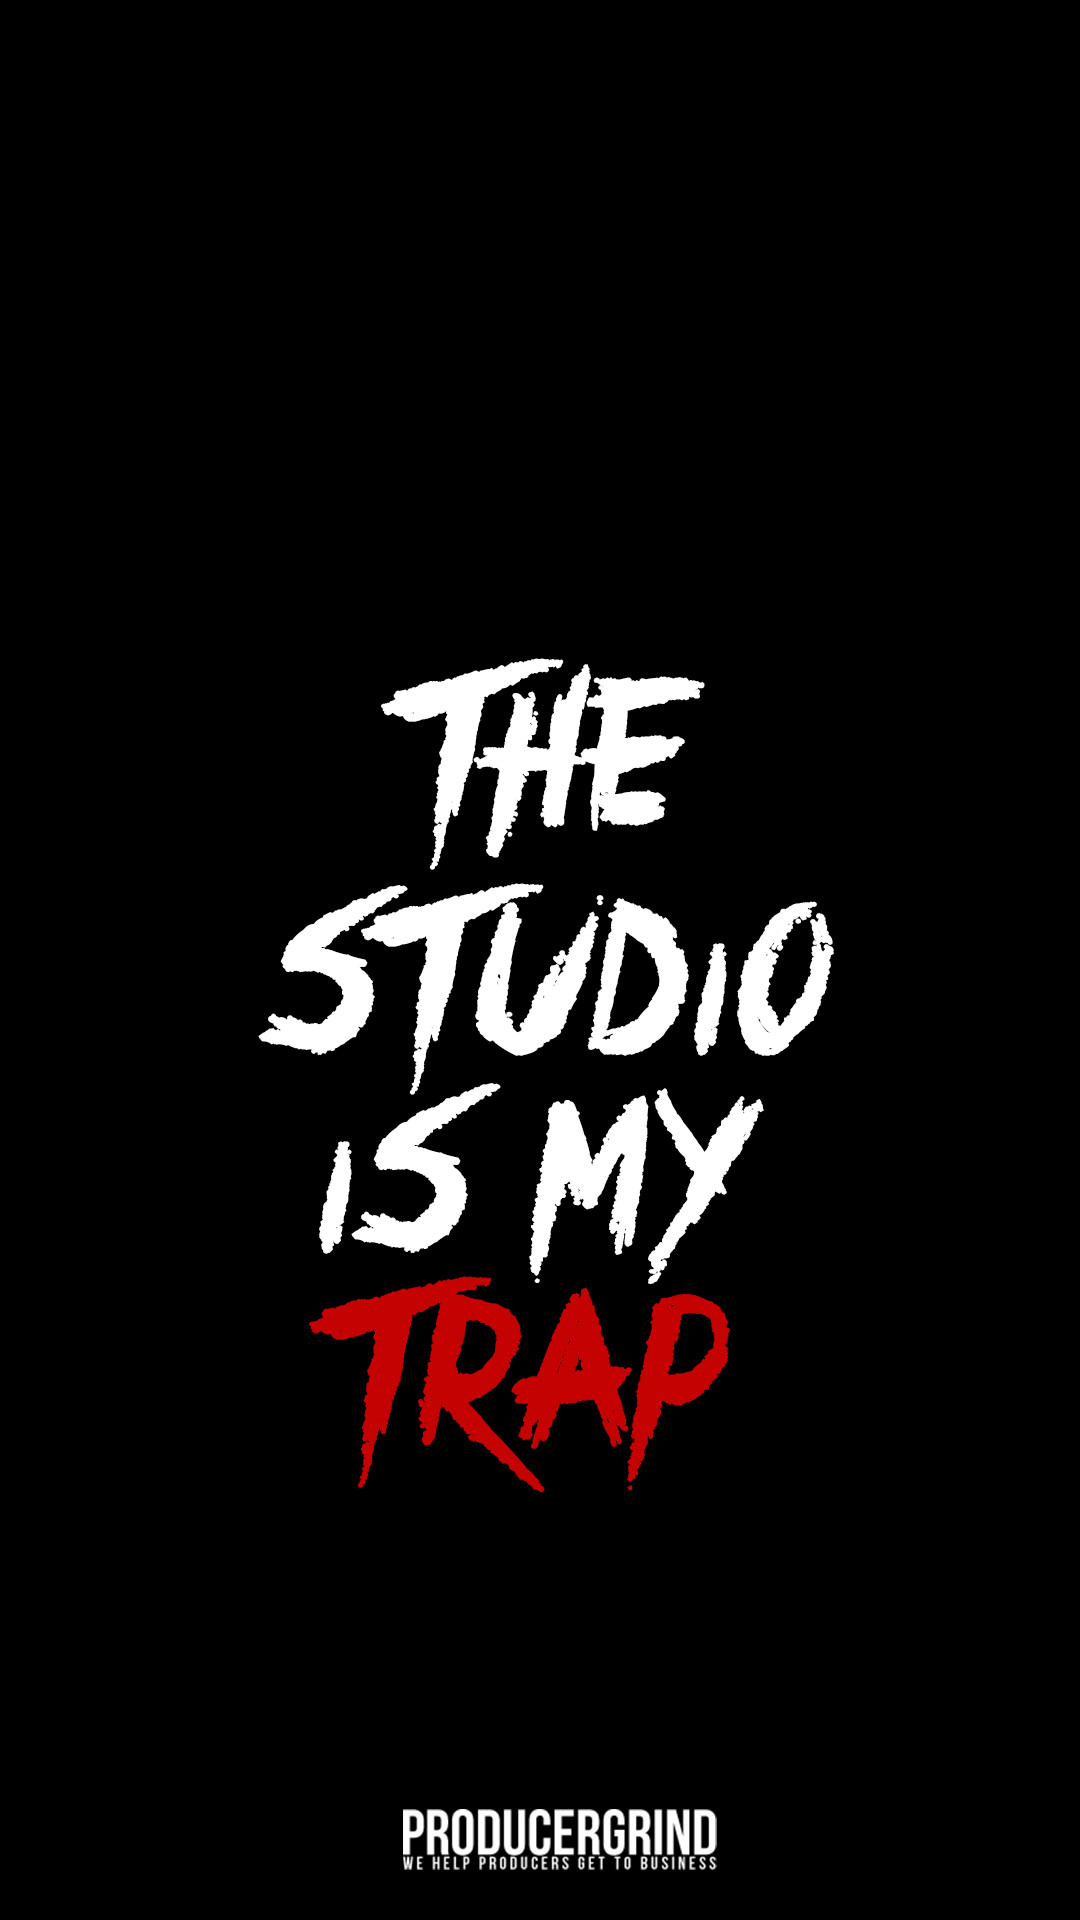 The studio is my trap iPhone 7 plus wallpaper android / iPhone